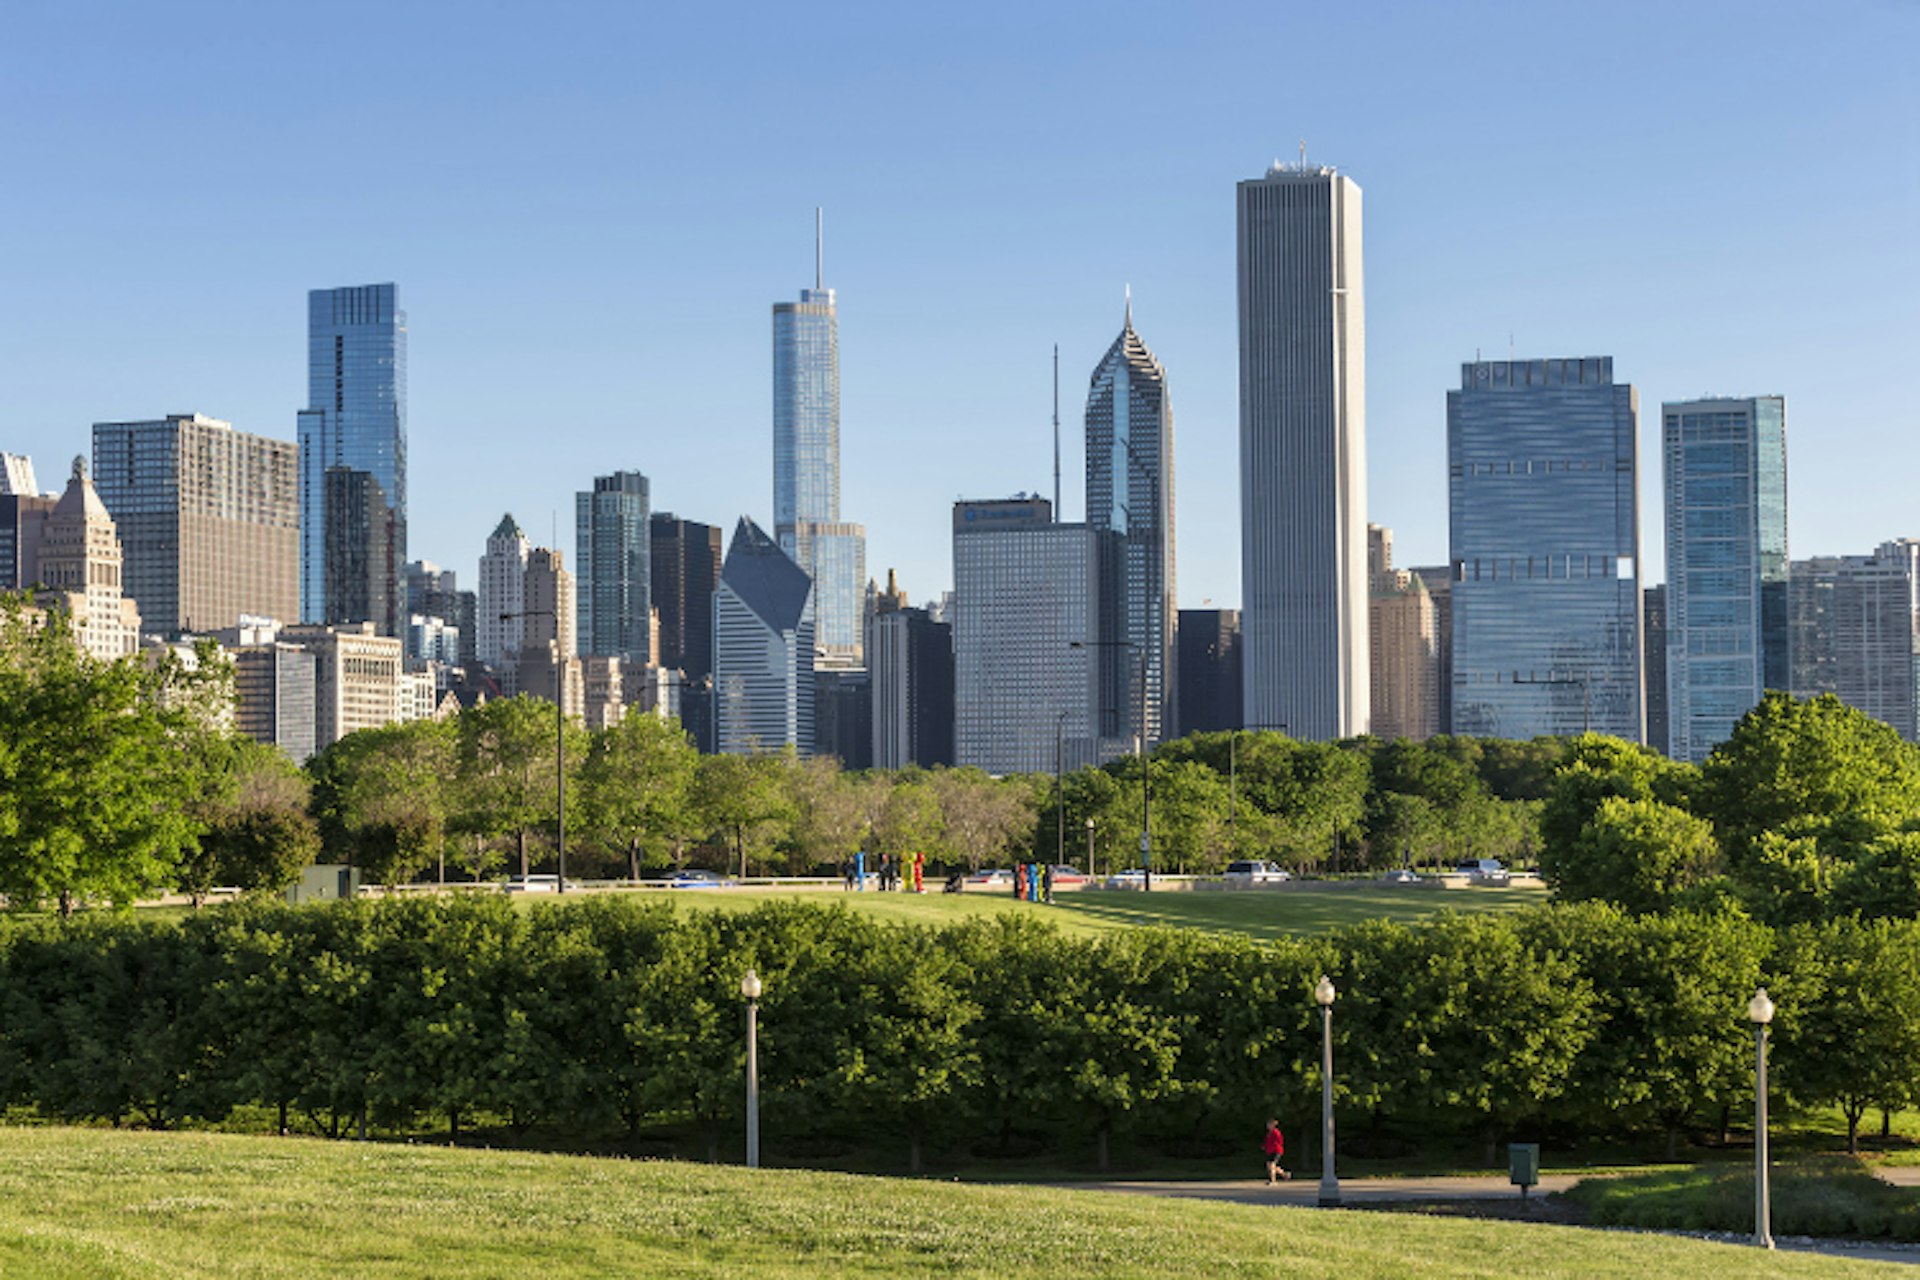 Millennium Park surrounded by the giants of Chicago's skyline. Image by Westend61 / Getty Images